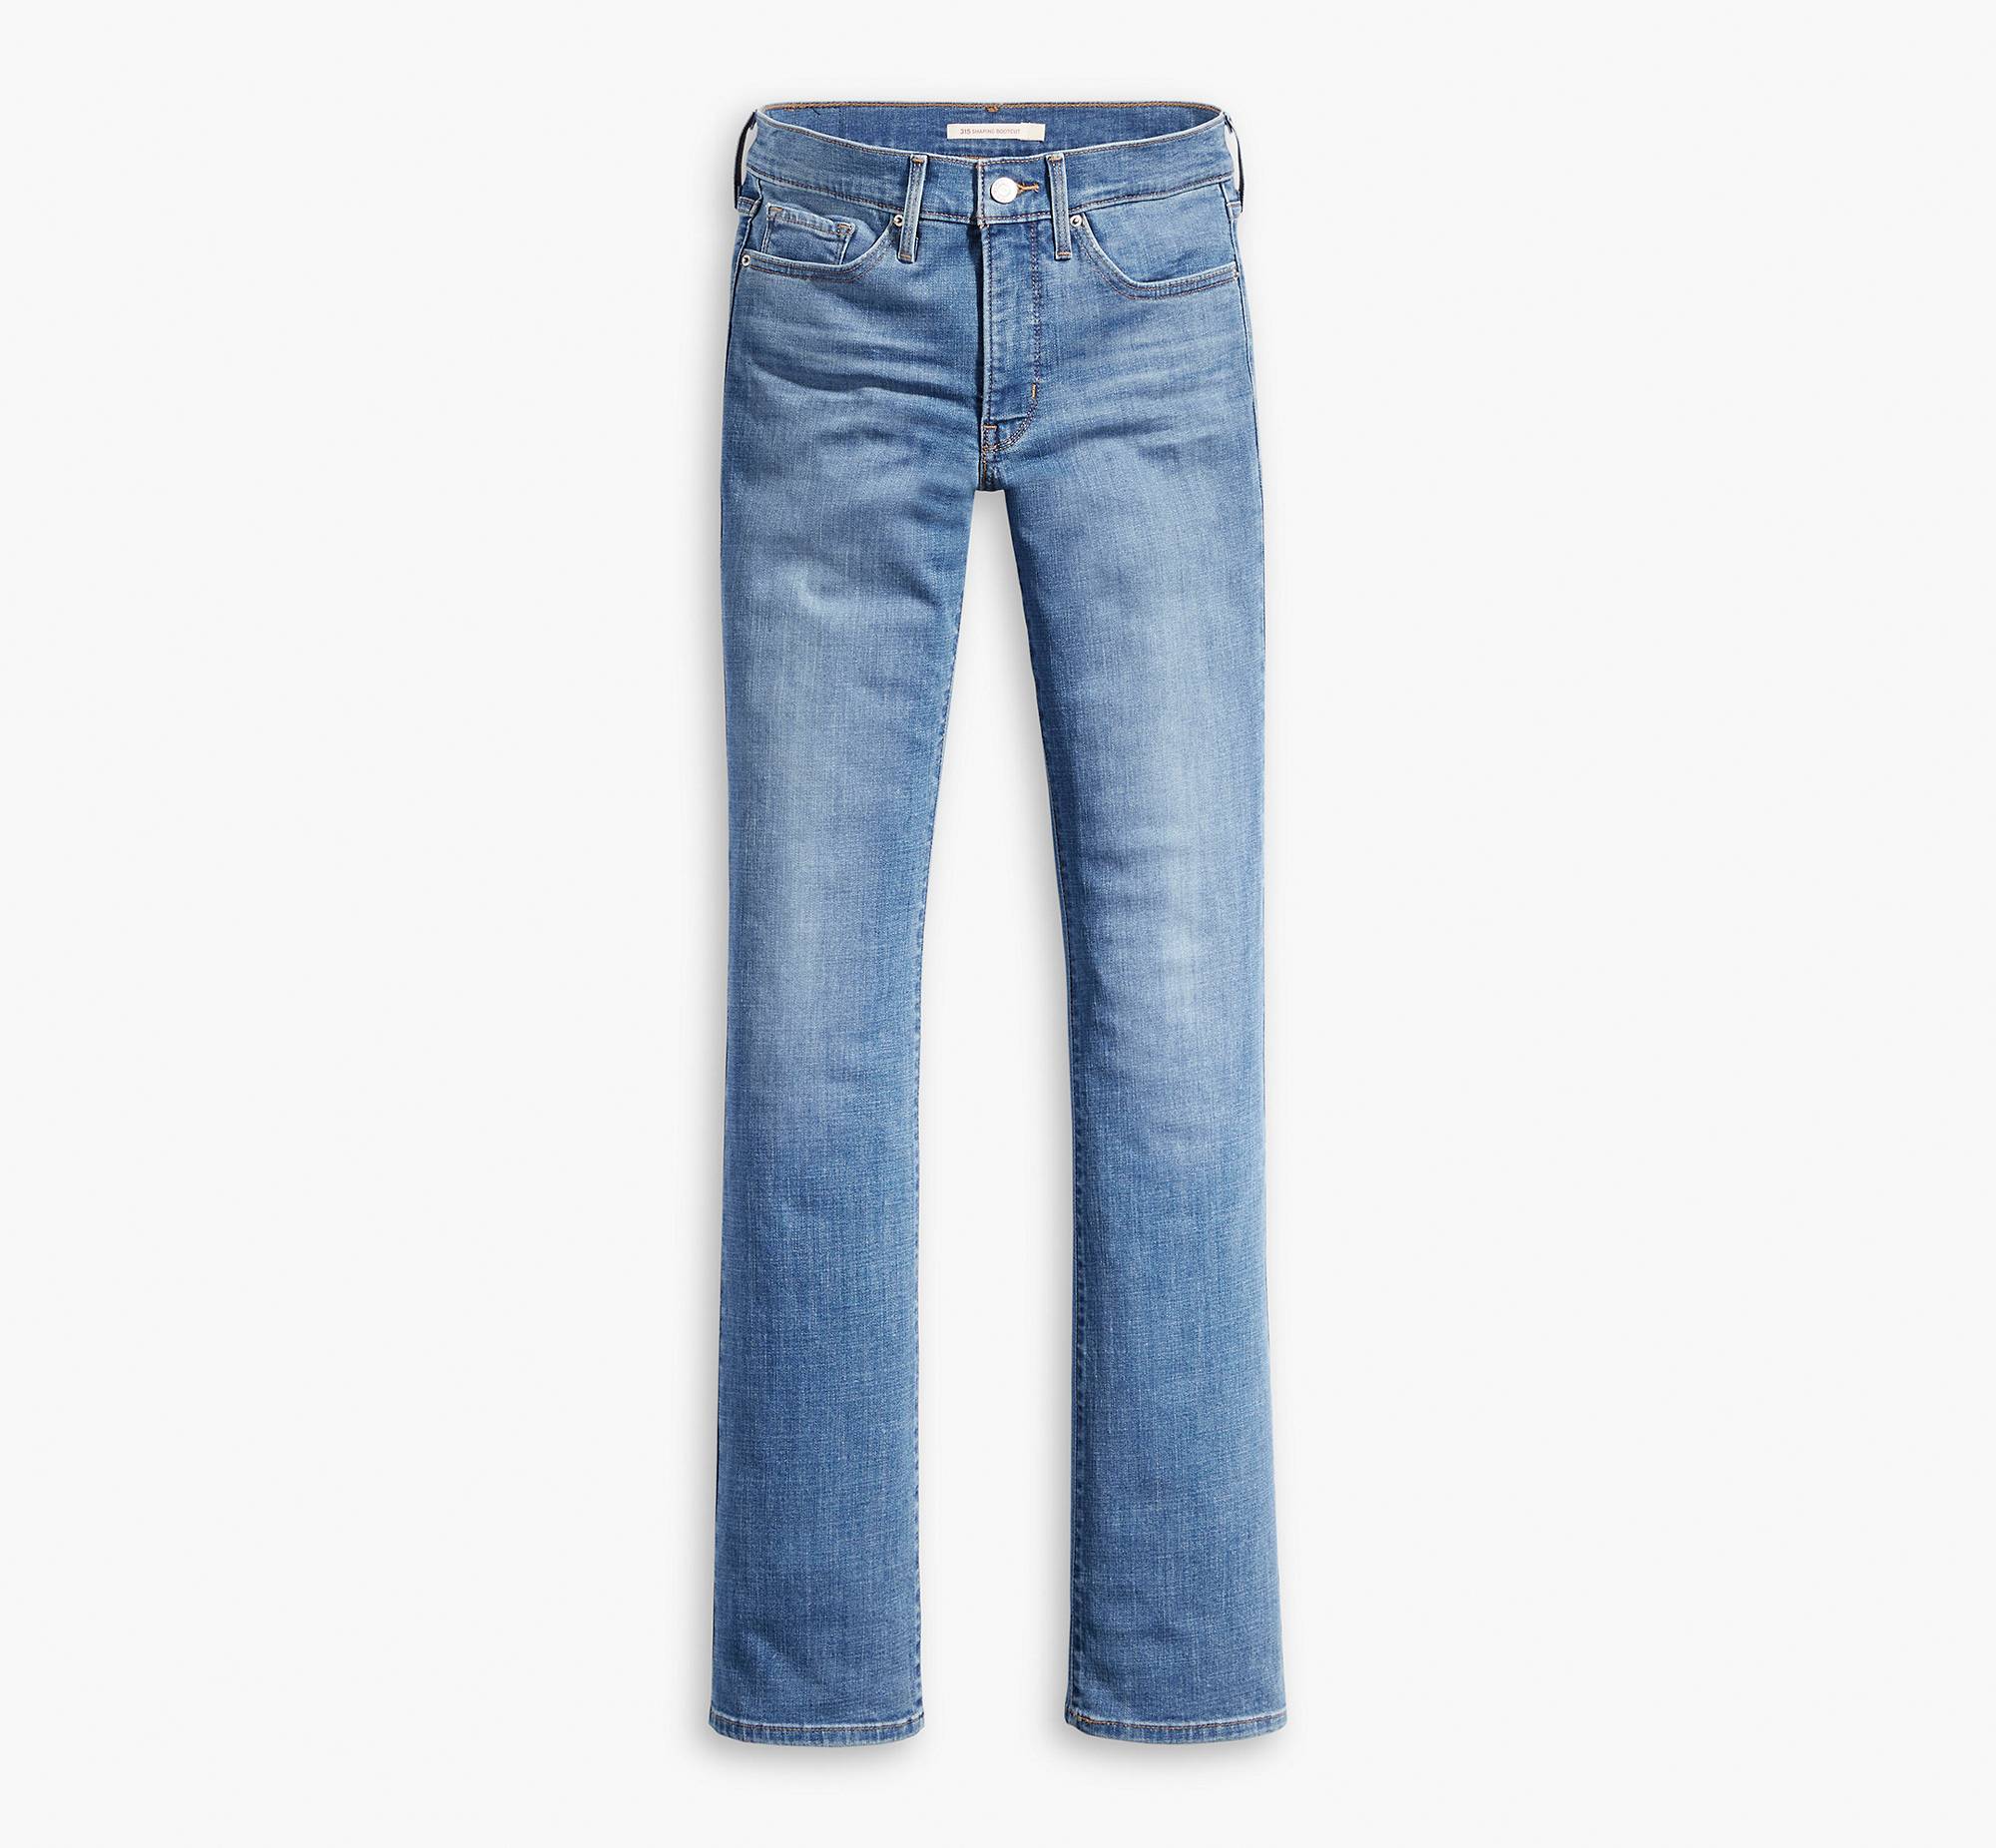 315™ Shaping Bootcut Jeans 4